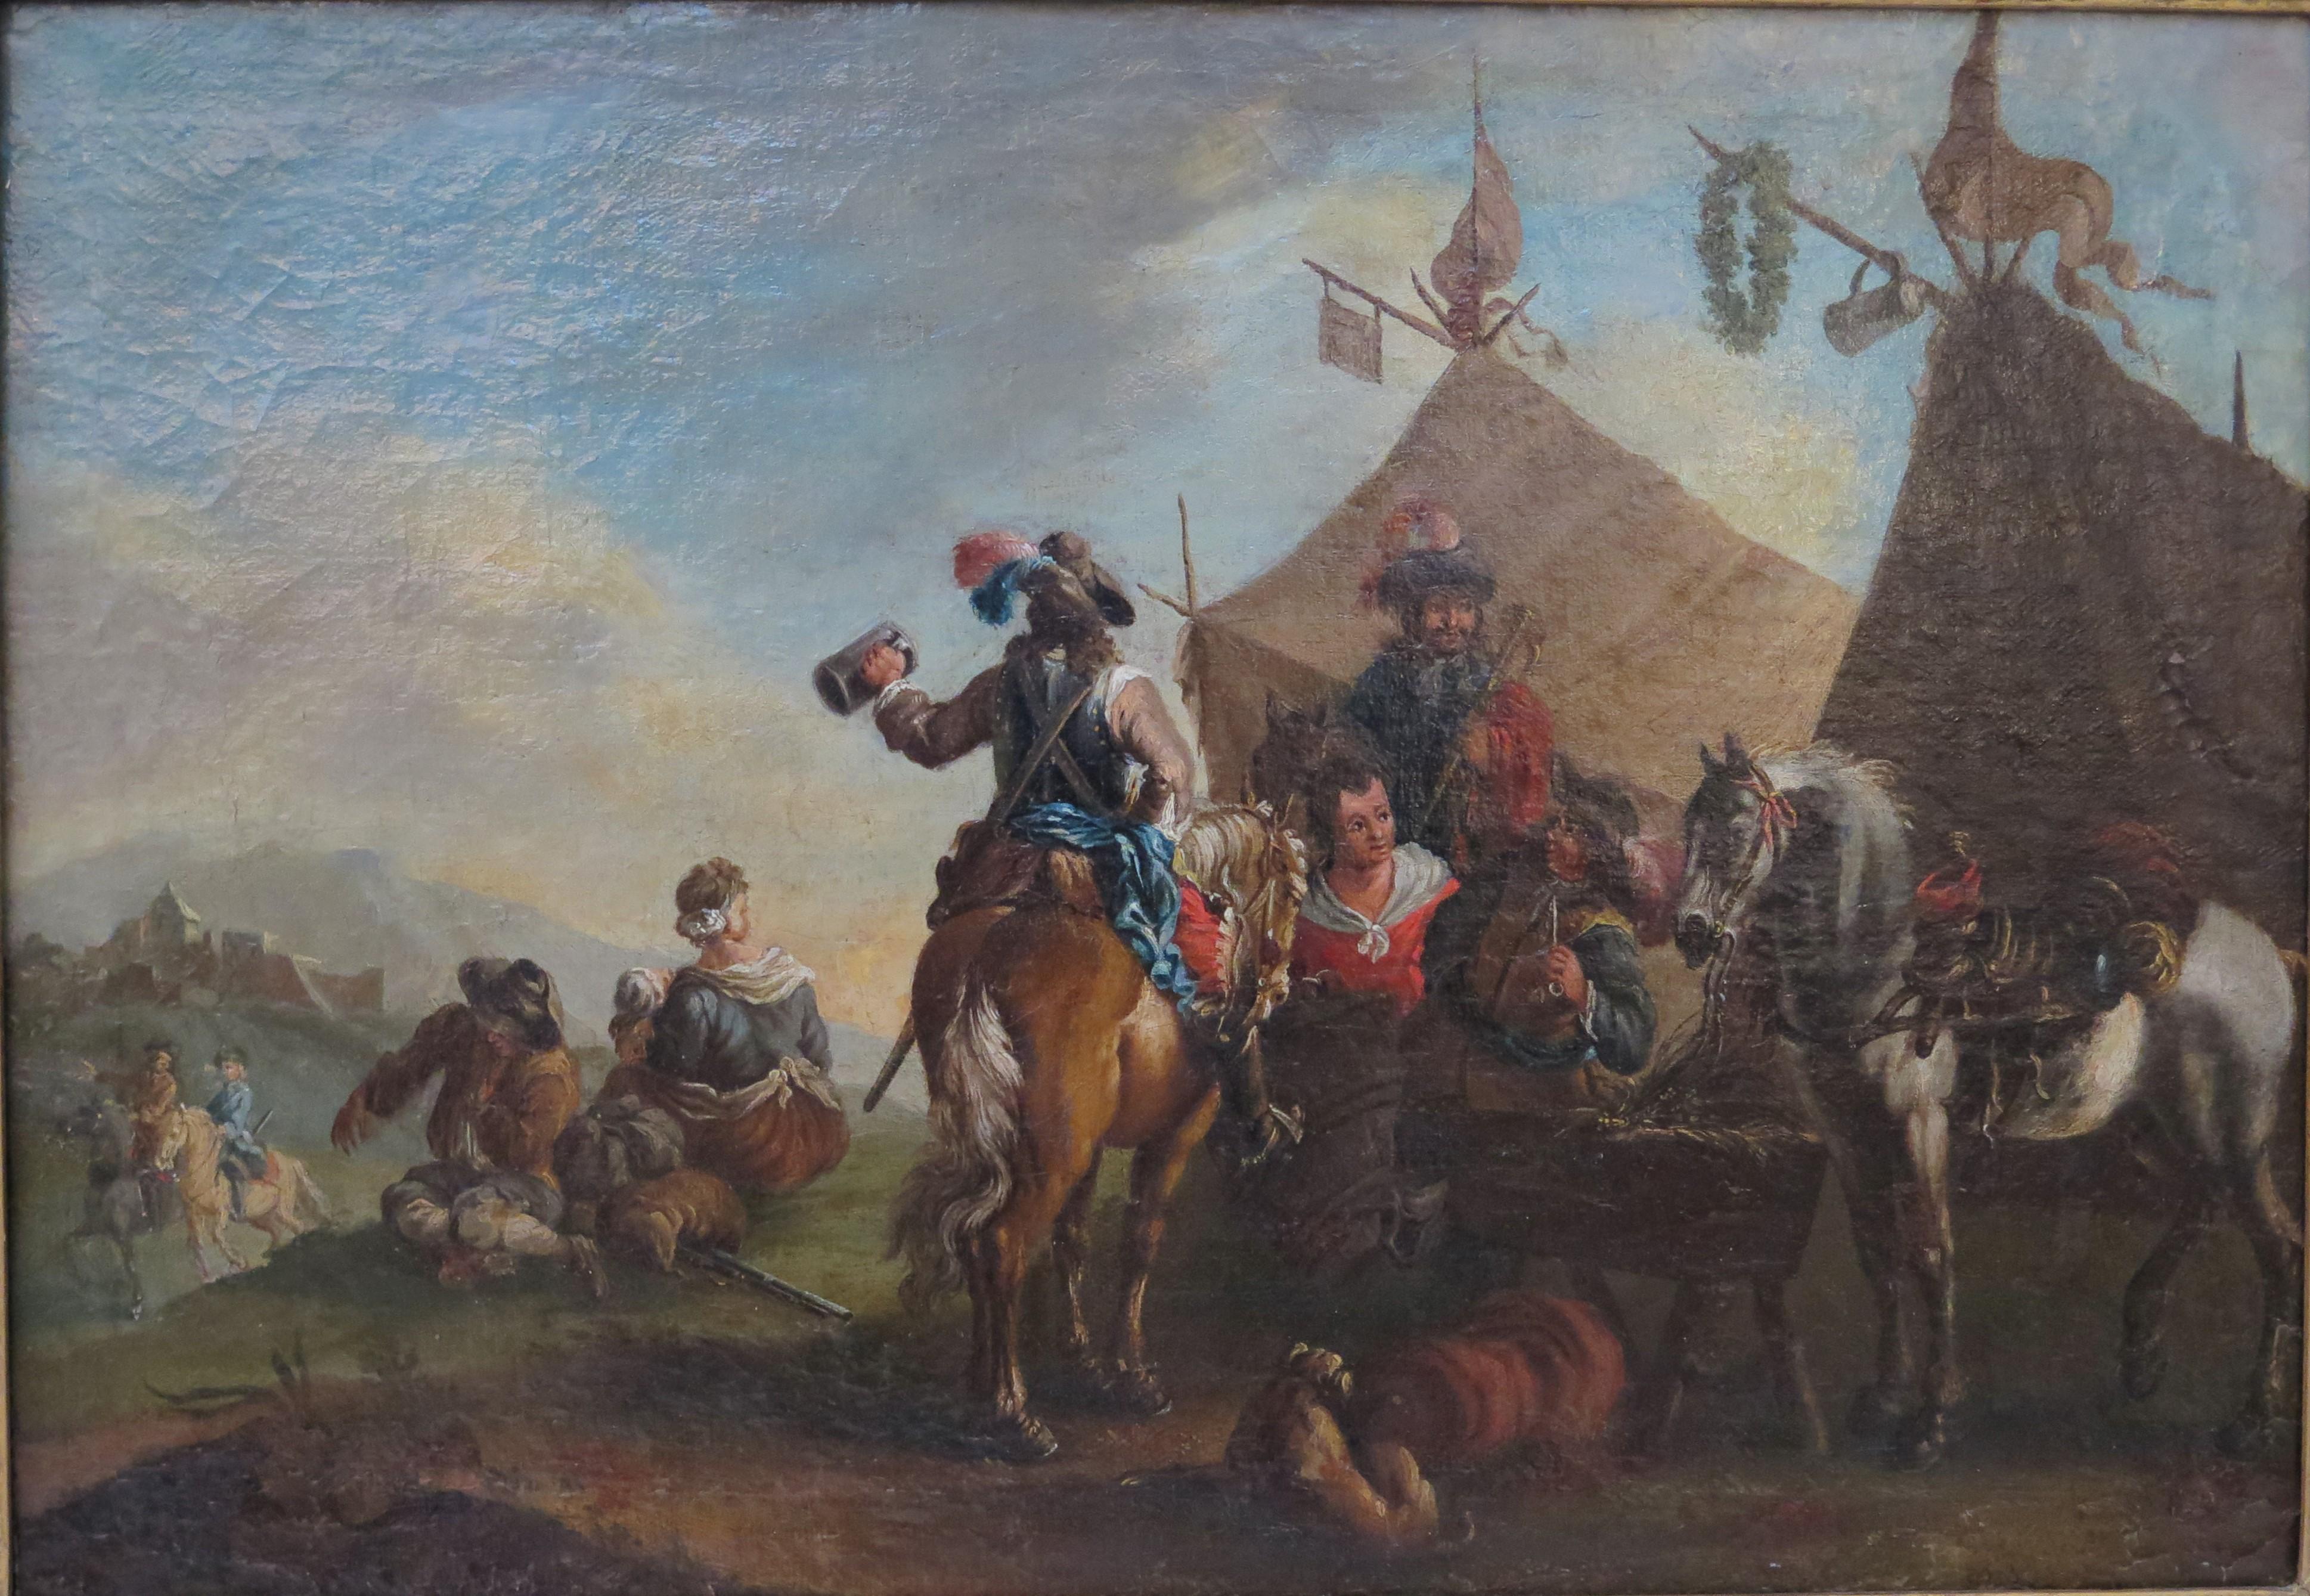 Baroque An 17th Century Oil on Canvas Scene after Philips Wouwerman (Dutch, 1619-1668) For Sale